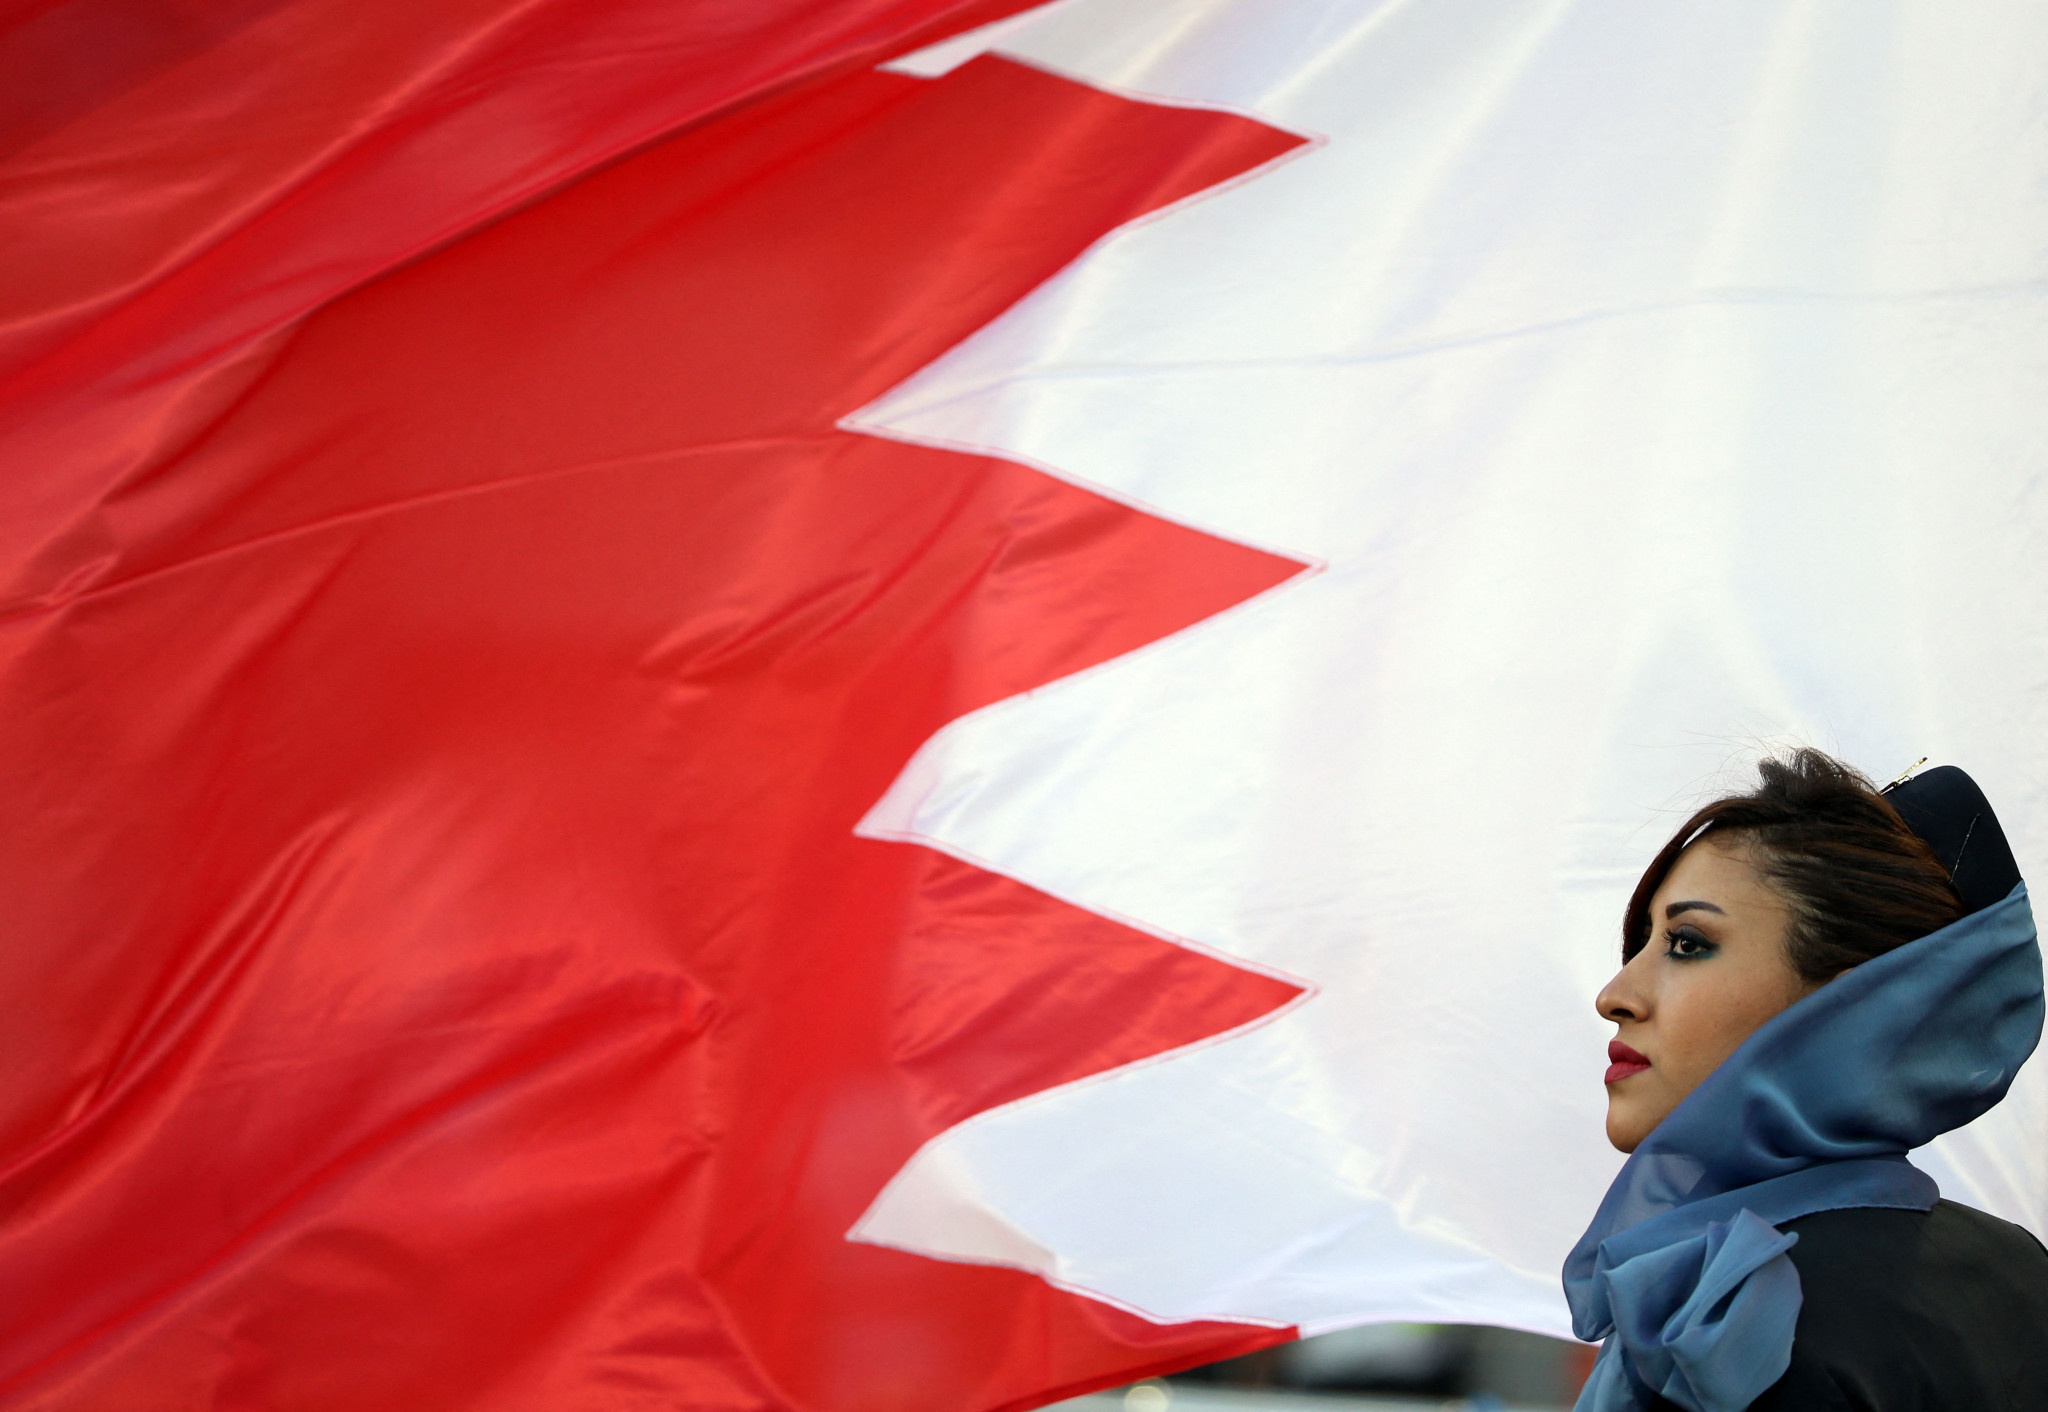 Bahrain is set to host a gender equity seminar in October ©Getty Images